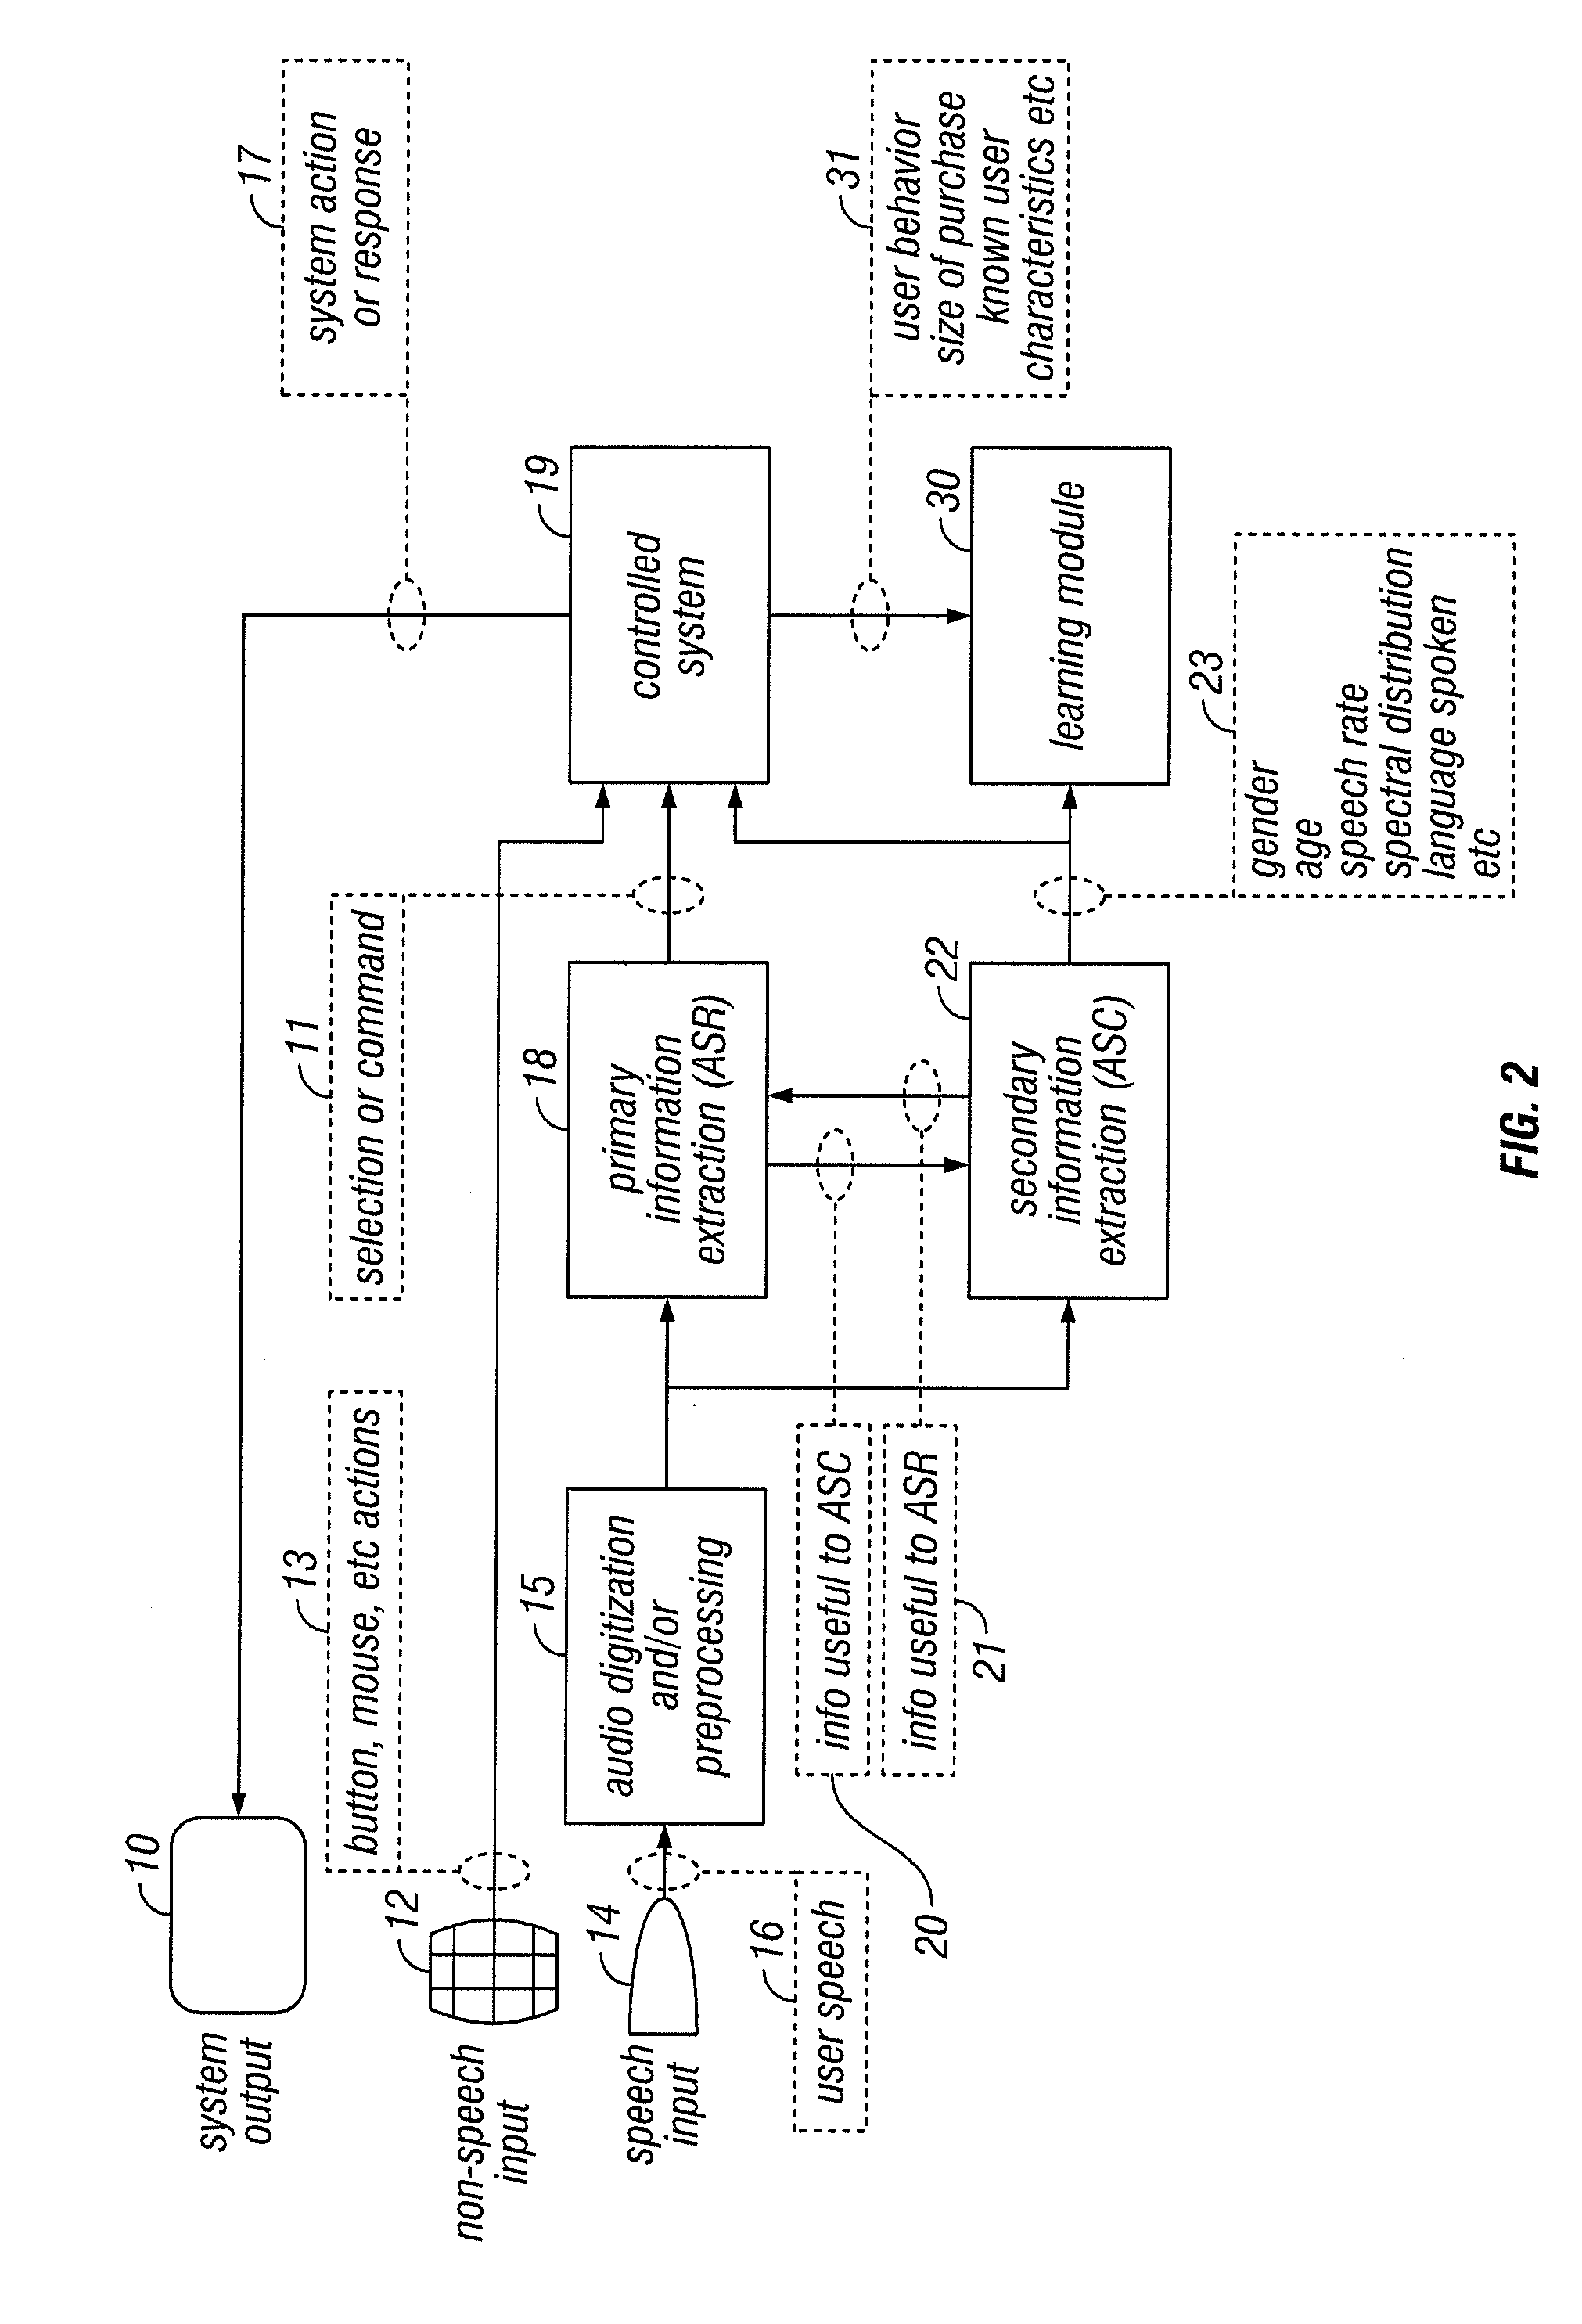 Method and Apparatus for Automatically Determining Speaker Characteristics for Speech-Directed Advertising or Other Enhancement of Speech-Controlled Devices or Services